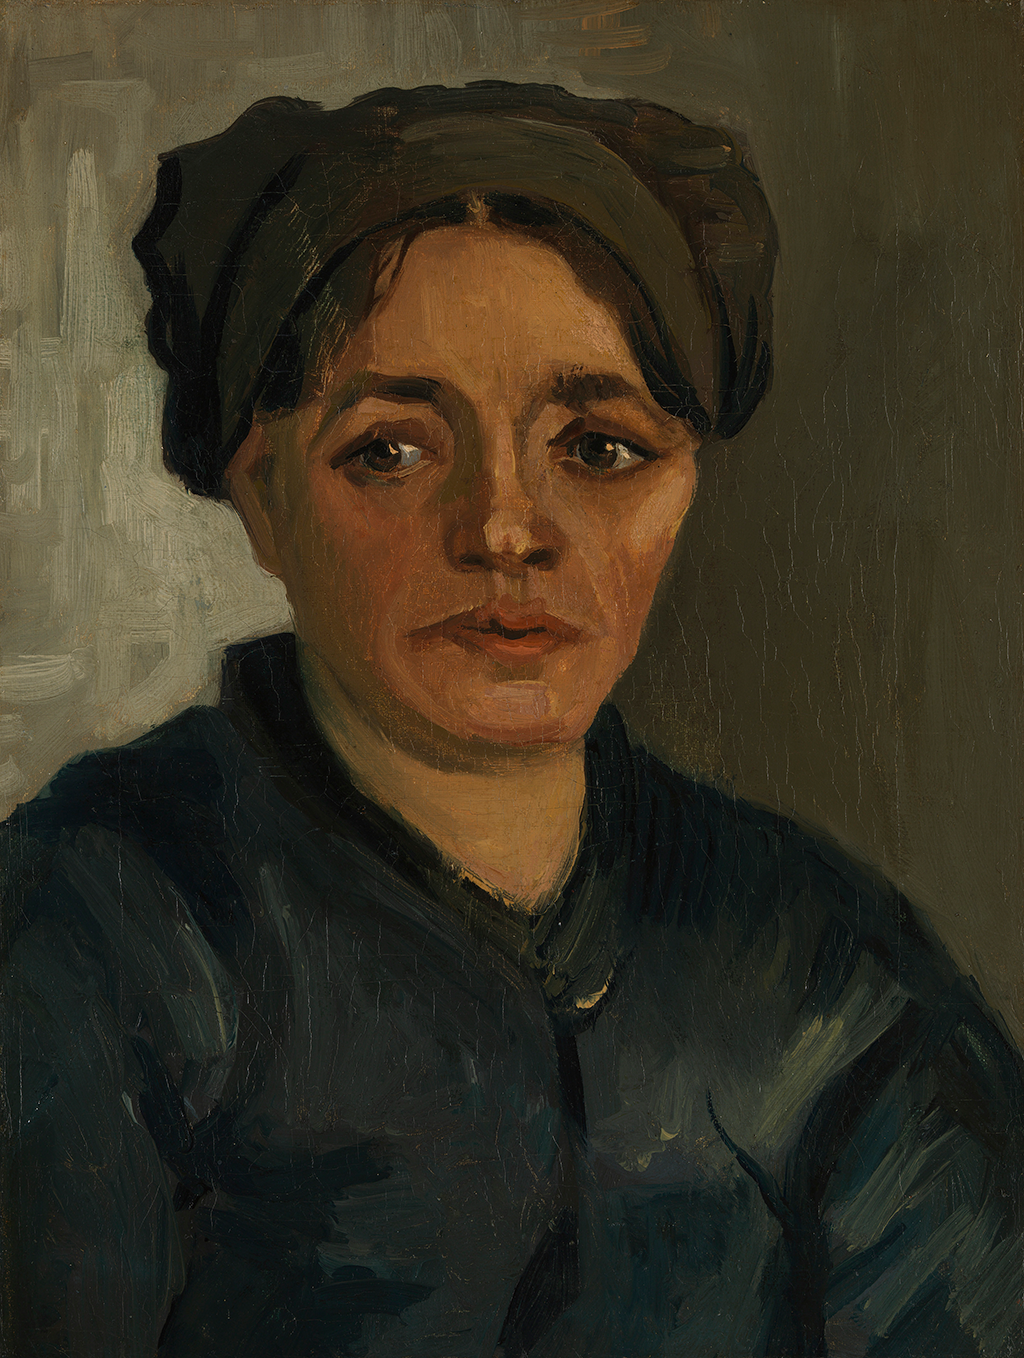 A portrait painting of a woman with brown hair and a headscarf or cap which covers most of her hair. She has light read lips and brown eyes. She wears dark blue shirt.